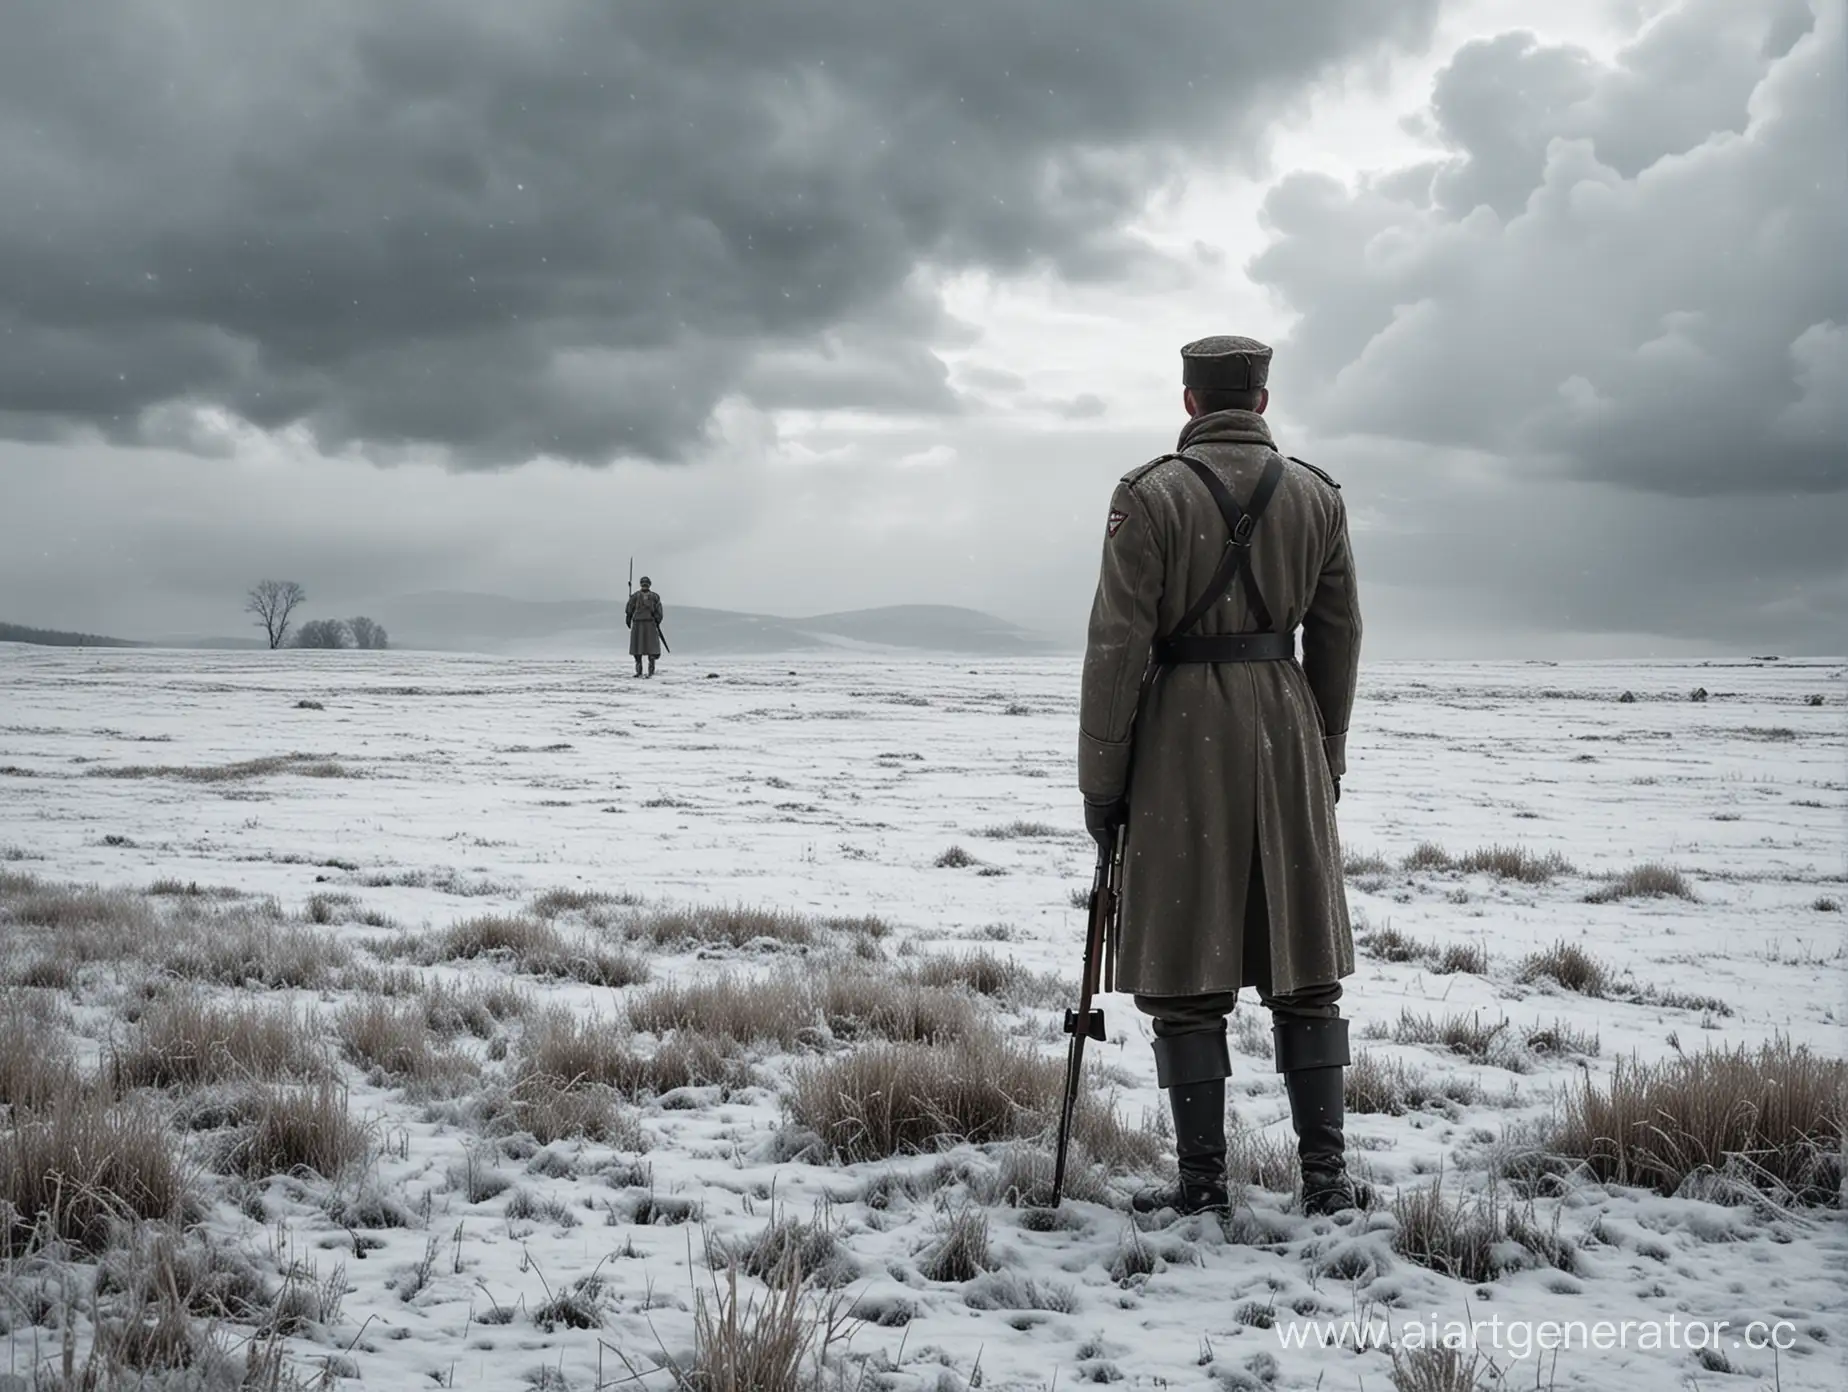 Frozen-Soldier-Standing-Alone-in-Snowy-Field-with-Haunting-Cloud-and-Distant-Figure